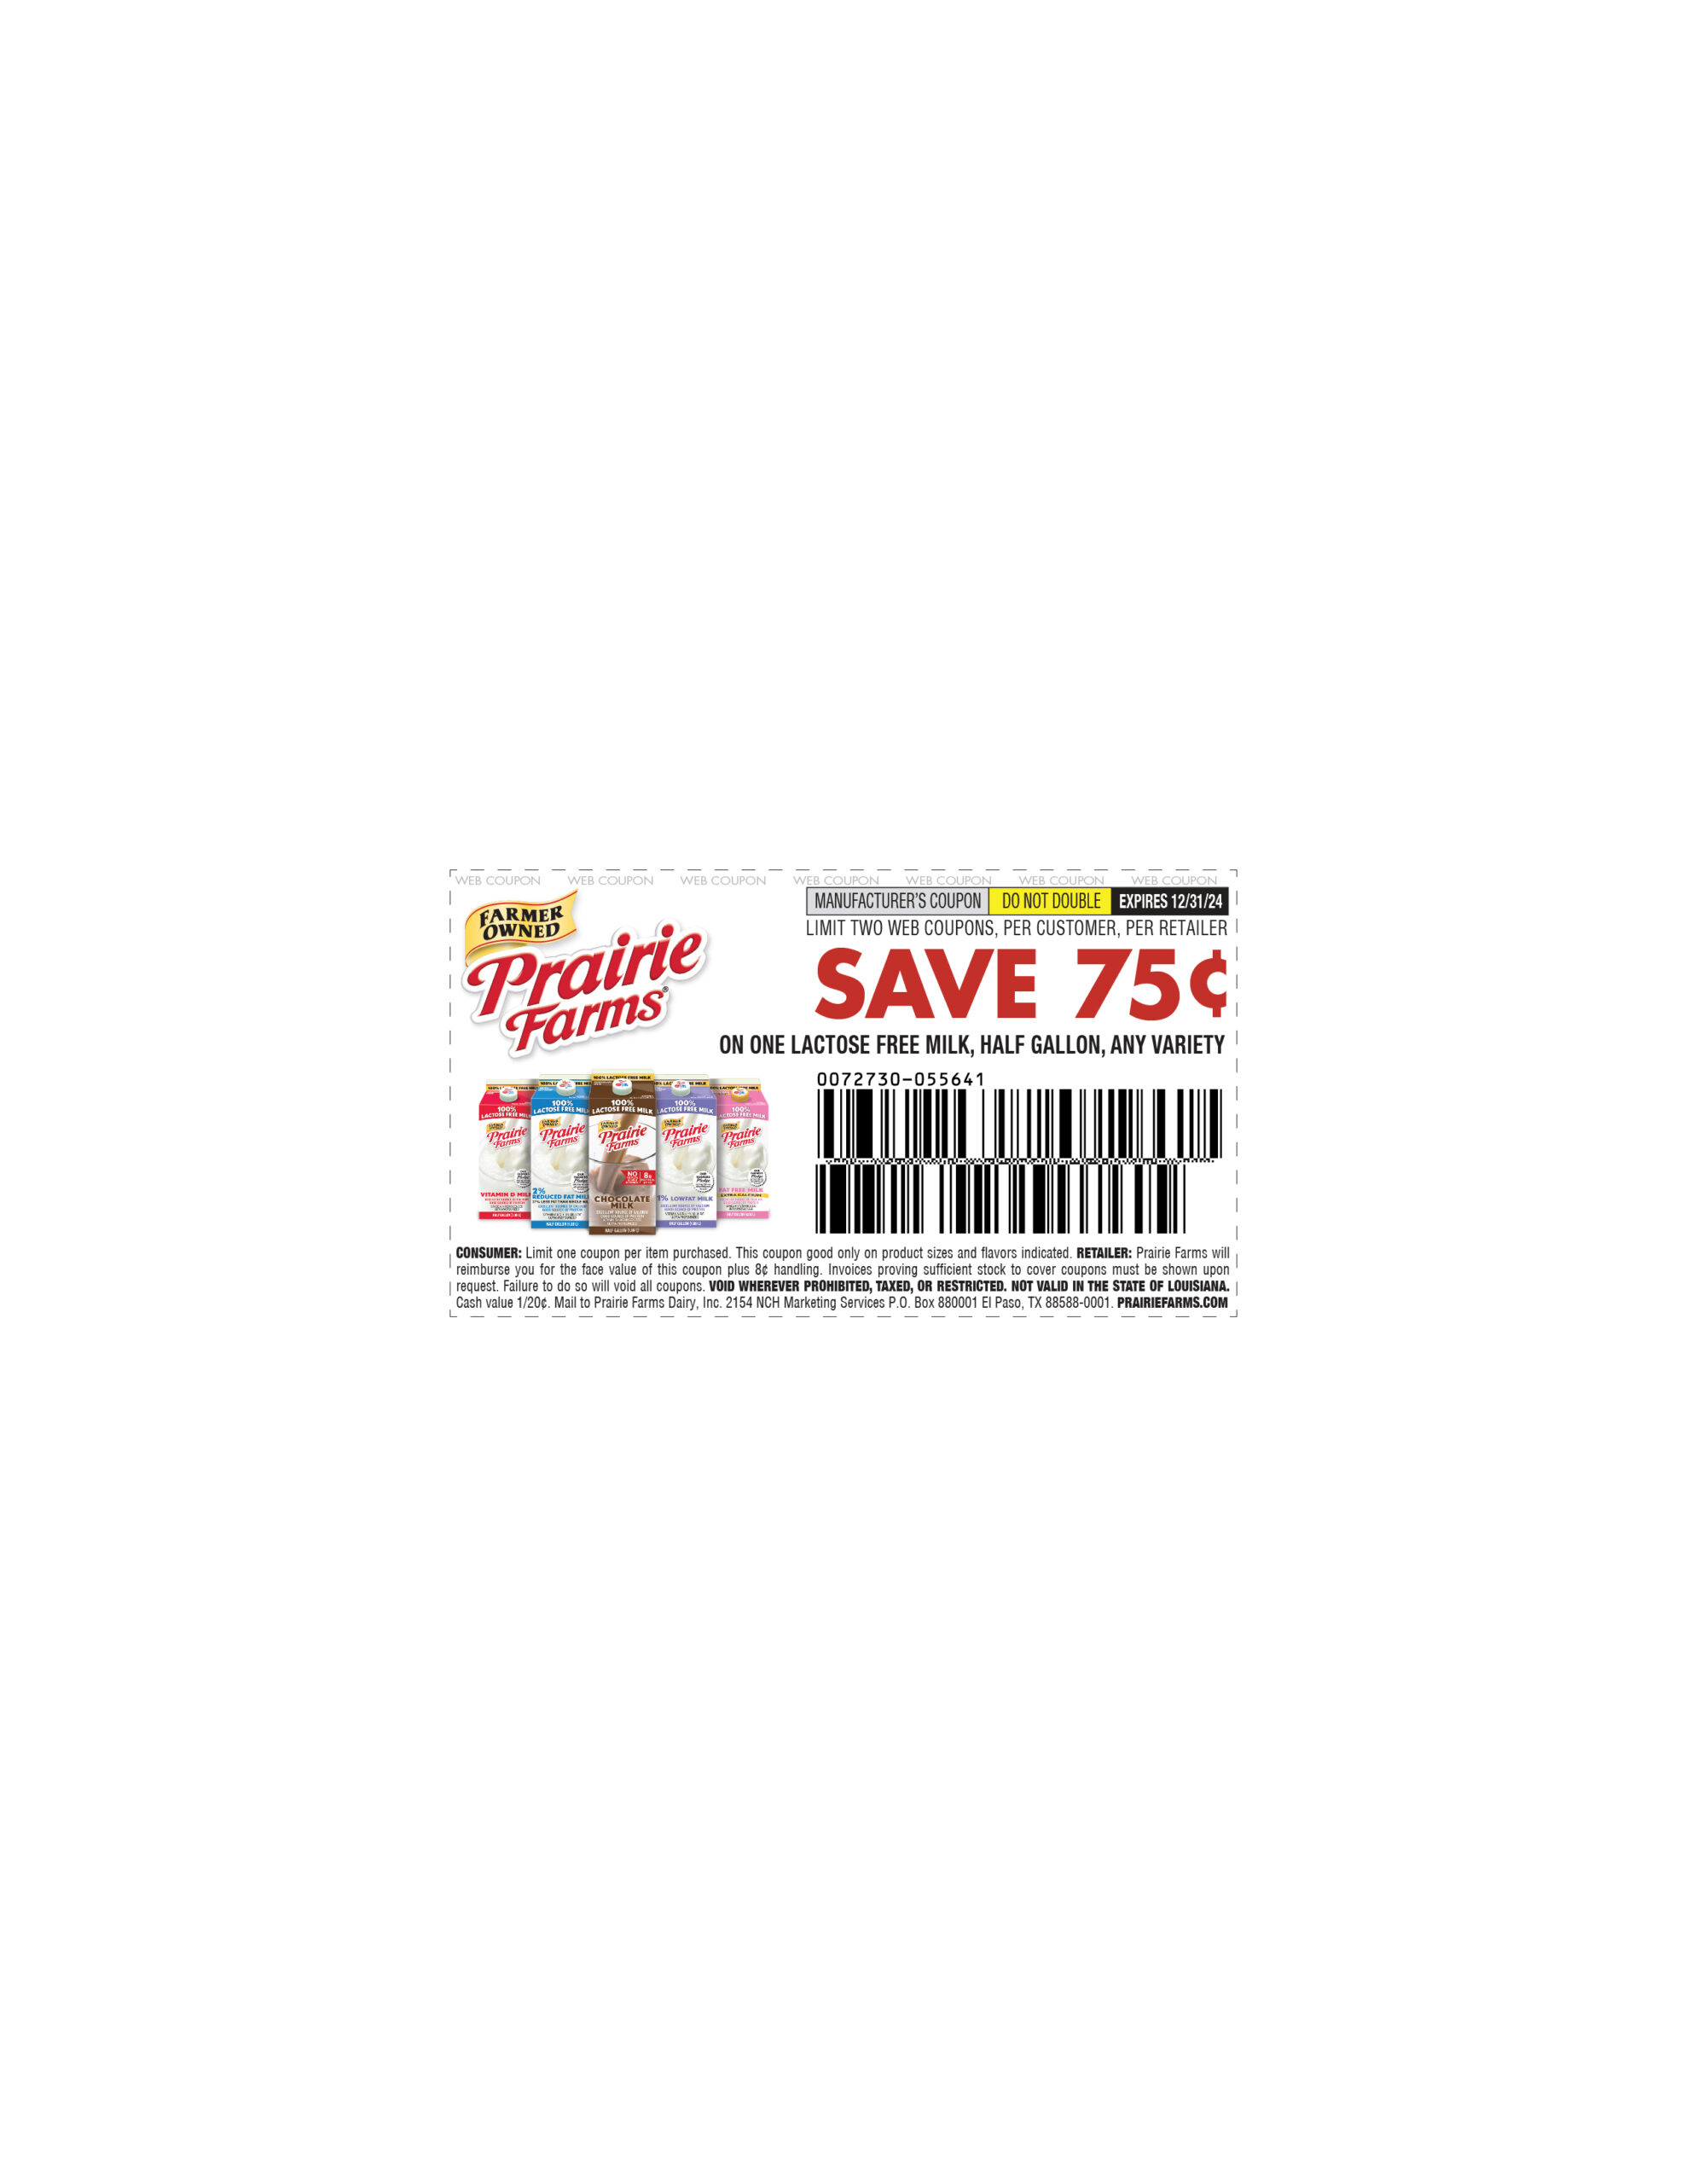 Coupons - Prairie Farms Dairy, Inc. intended for Free Milk Coupons Printable